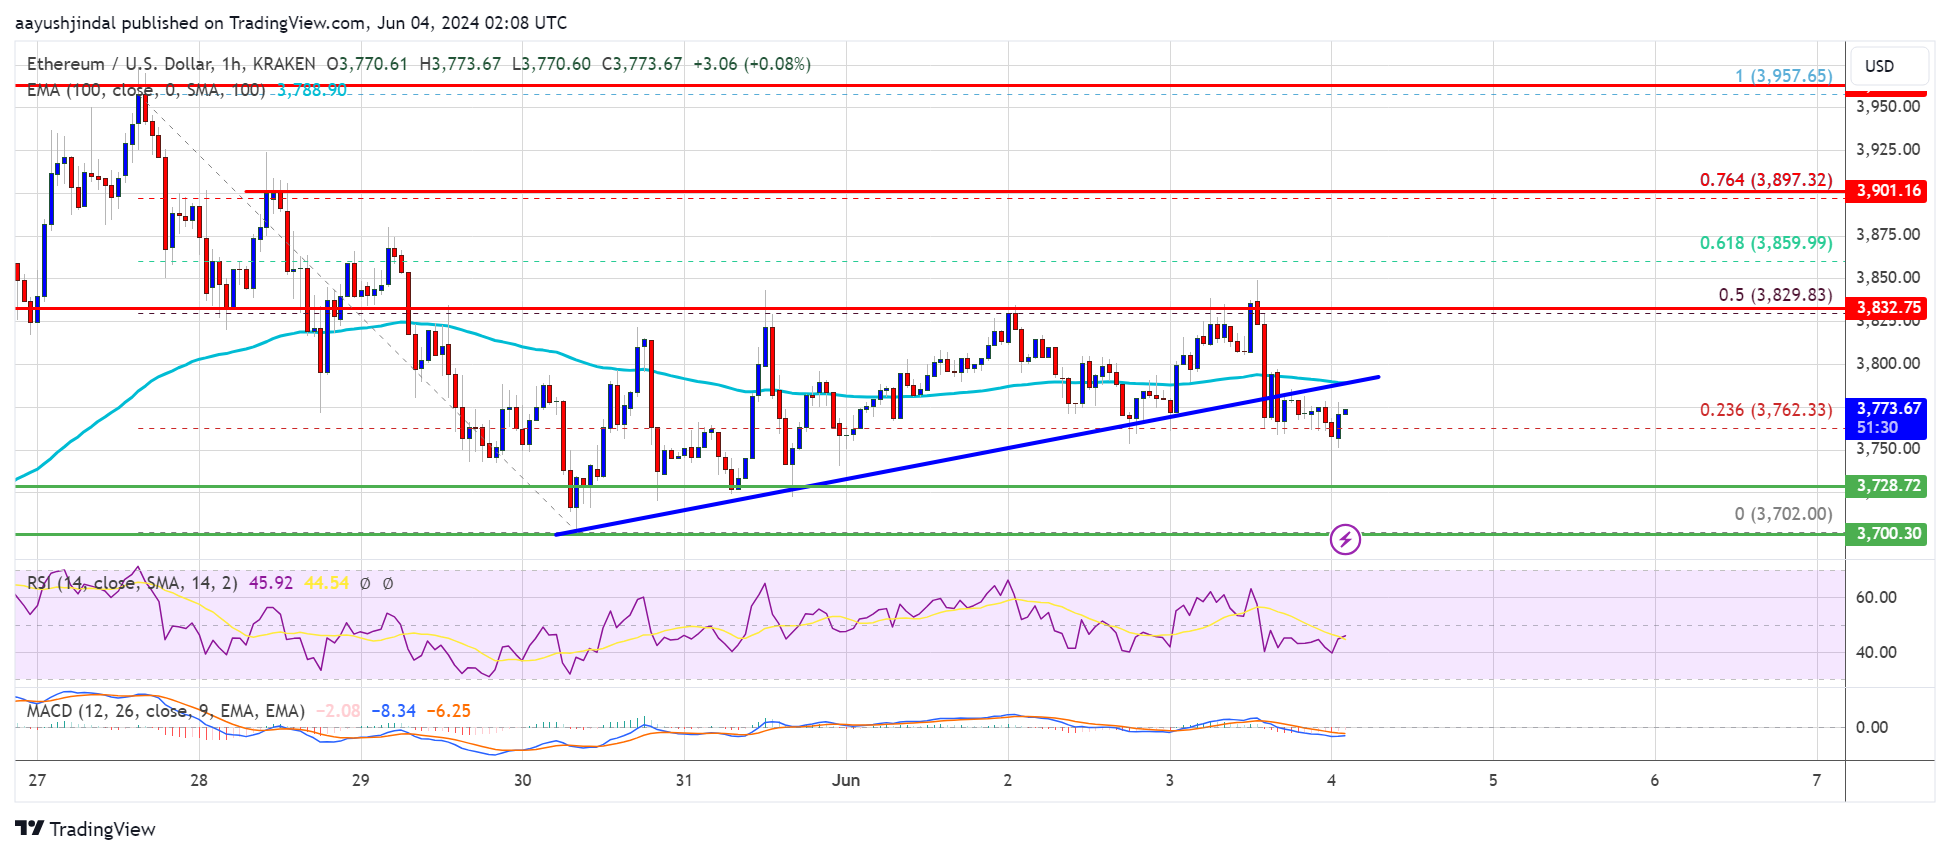 Ethereum Signals Bearish Extension: Is a Short-Term Downtrend Coming?